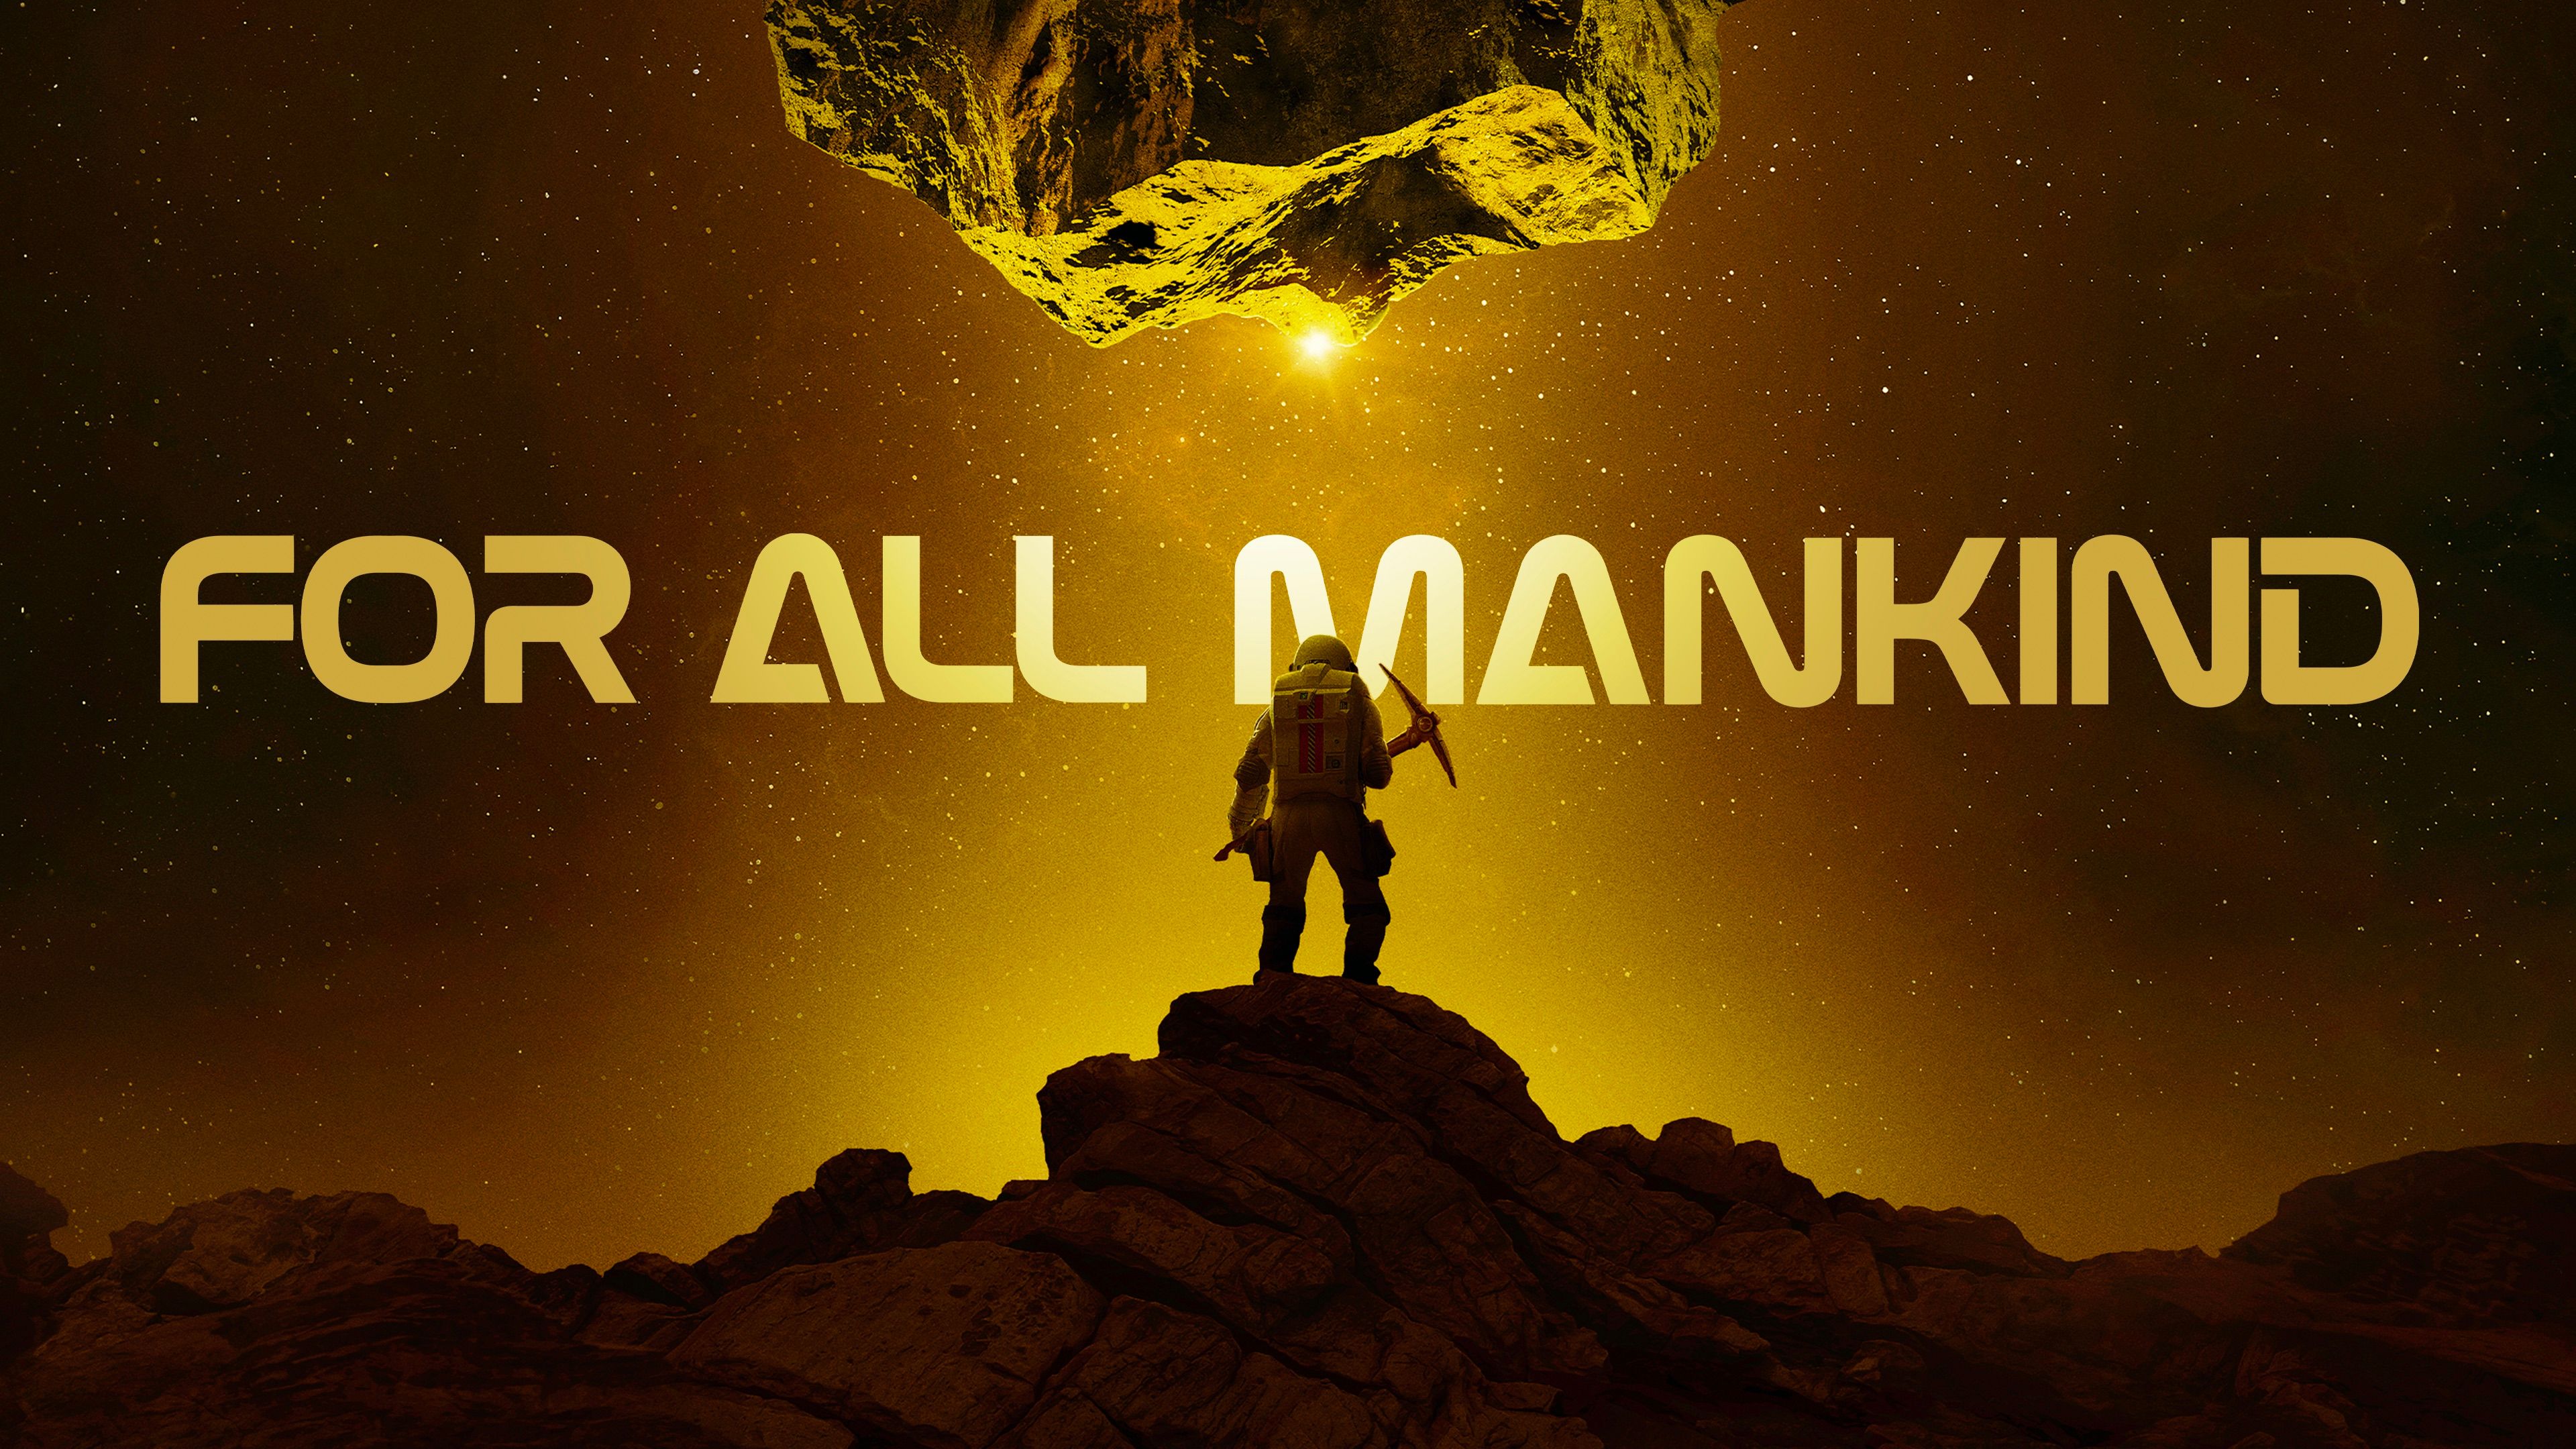 ‘For All Mankind’ Season 4 Trailer — Welcome to the 21st Century